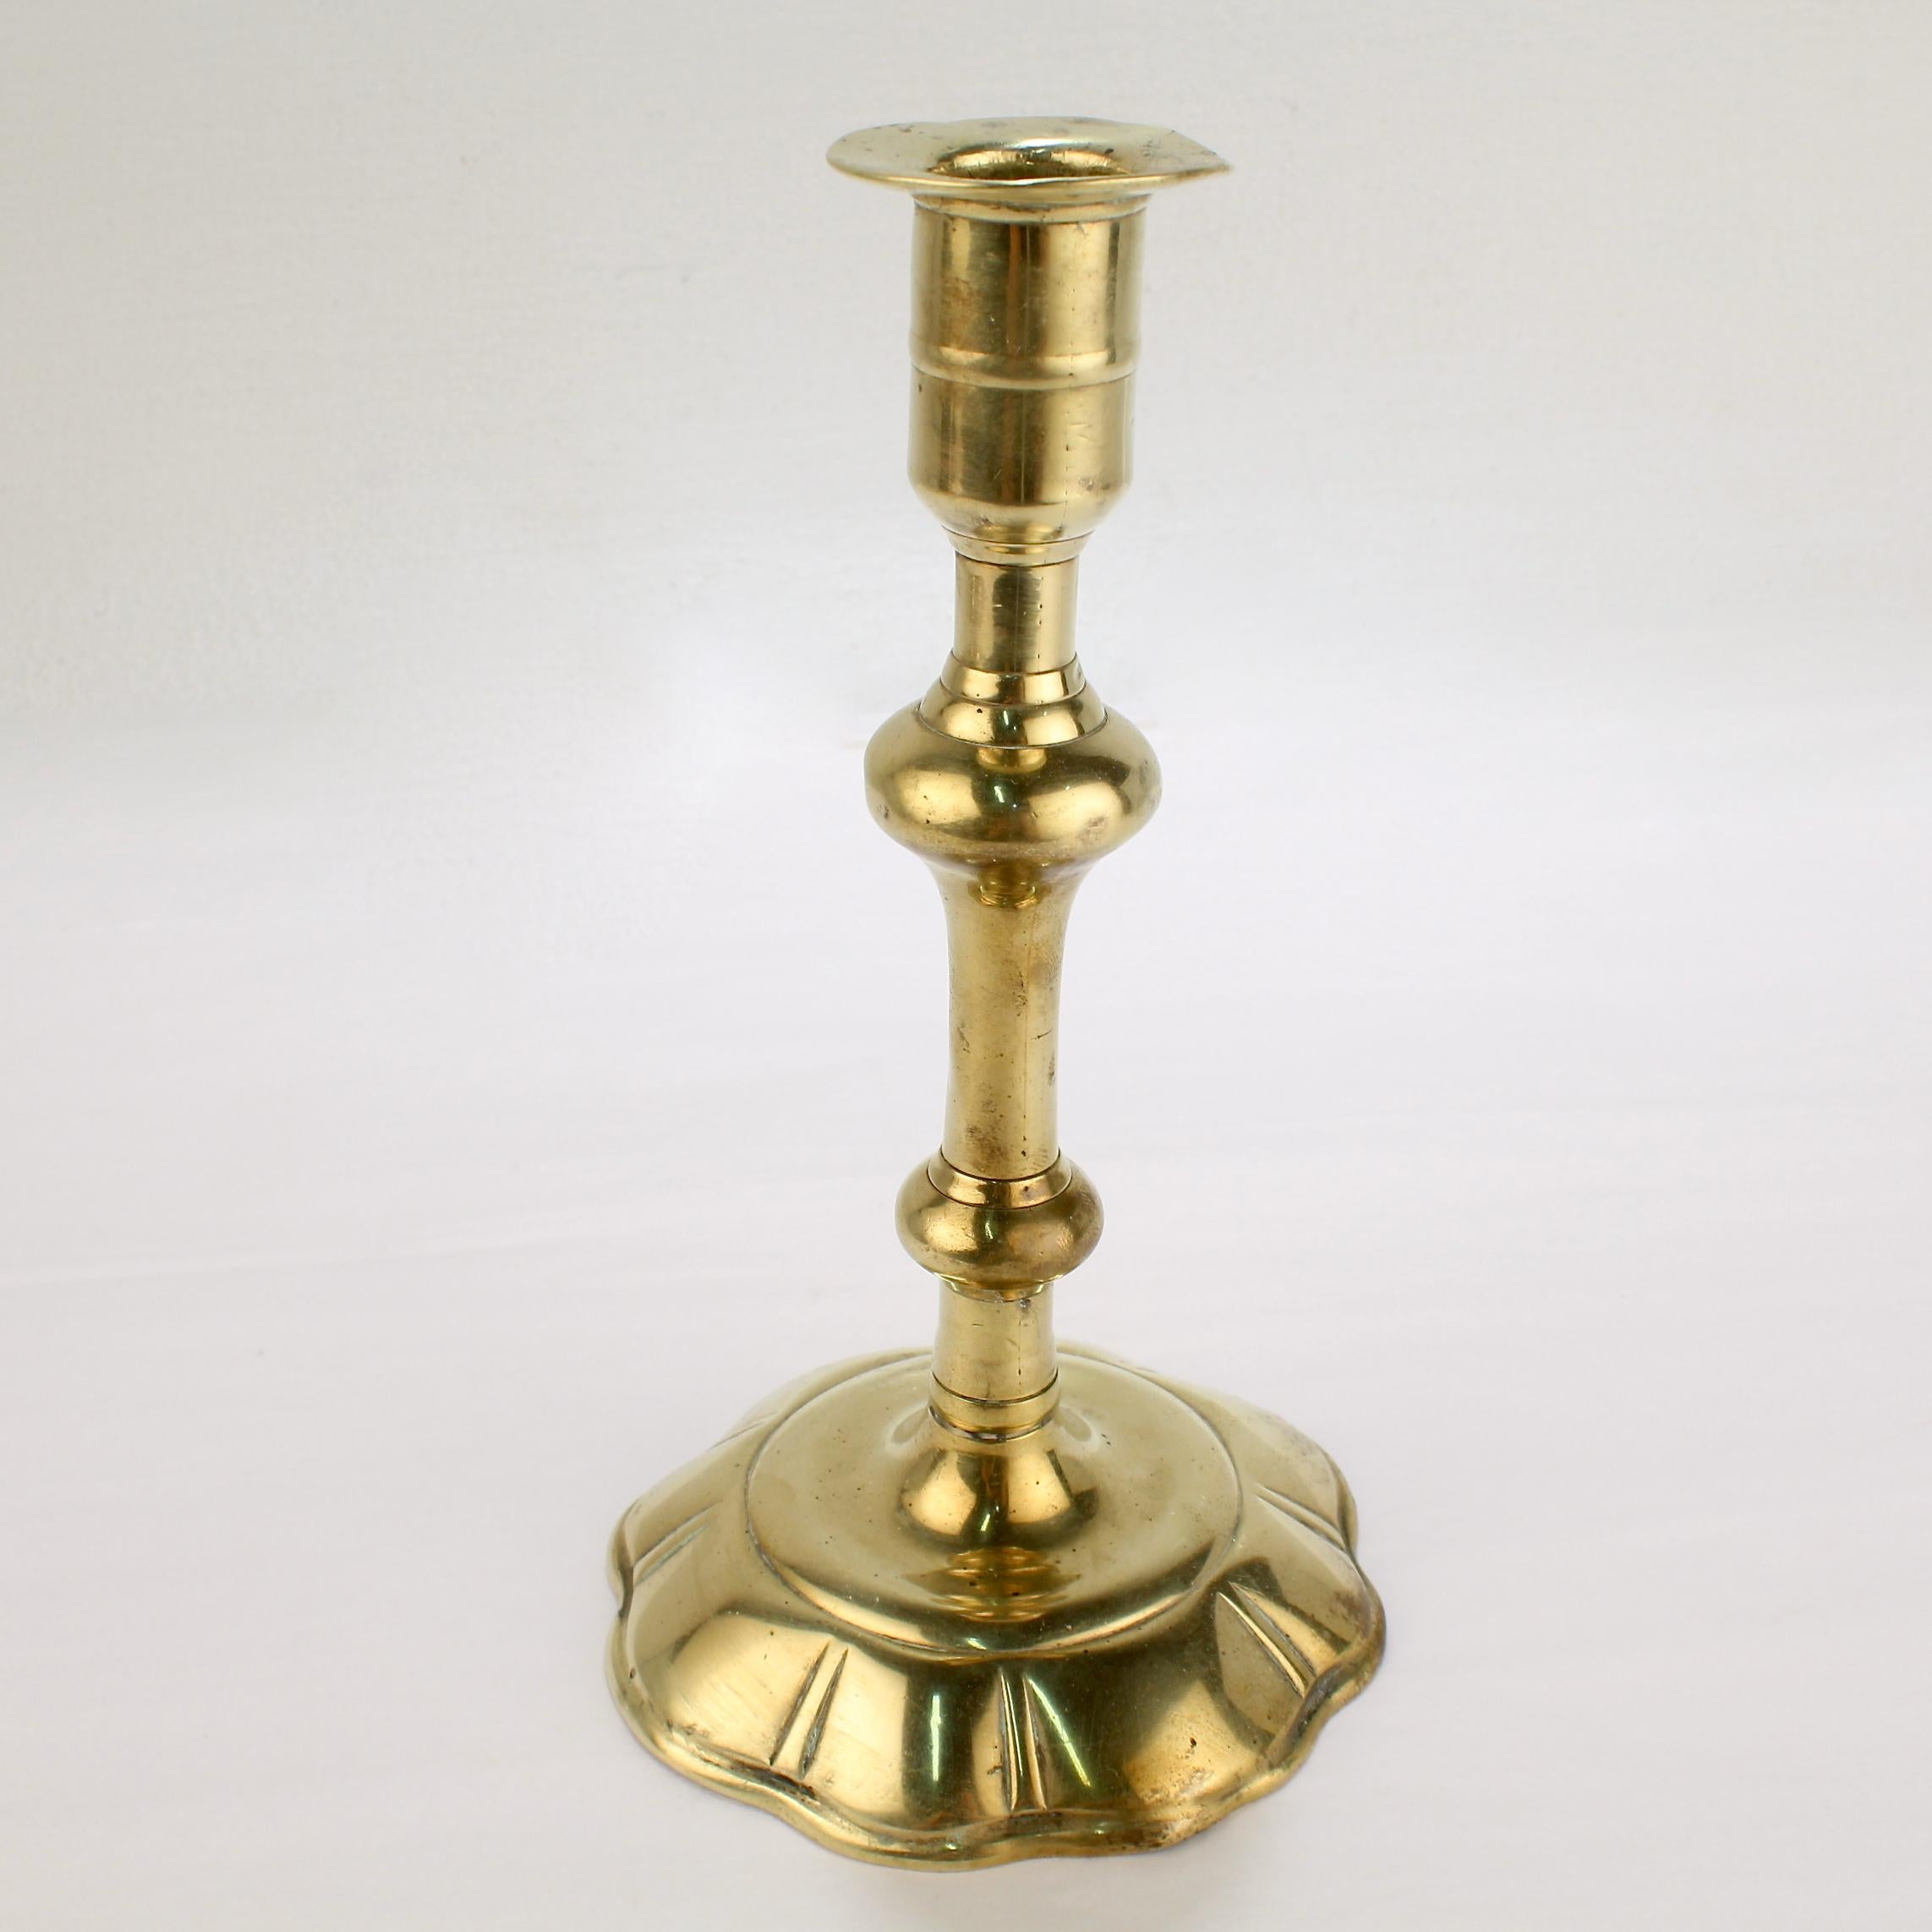 A fine antique English candlestick.

With a 8 lobed petal base, a turned shaft, and an integral bobeche. 

Simply a fine period candlestick!

Date:
Mid-18th century

Overall condition:
It is in overall far, as-pictured, used estate